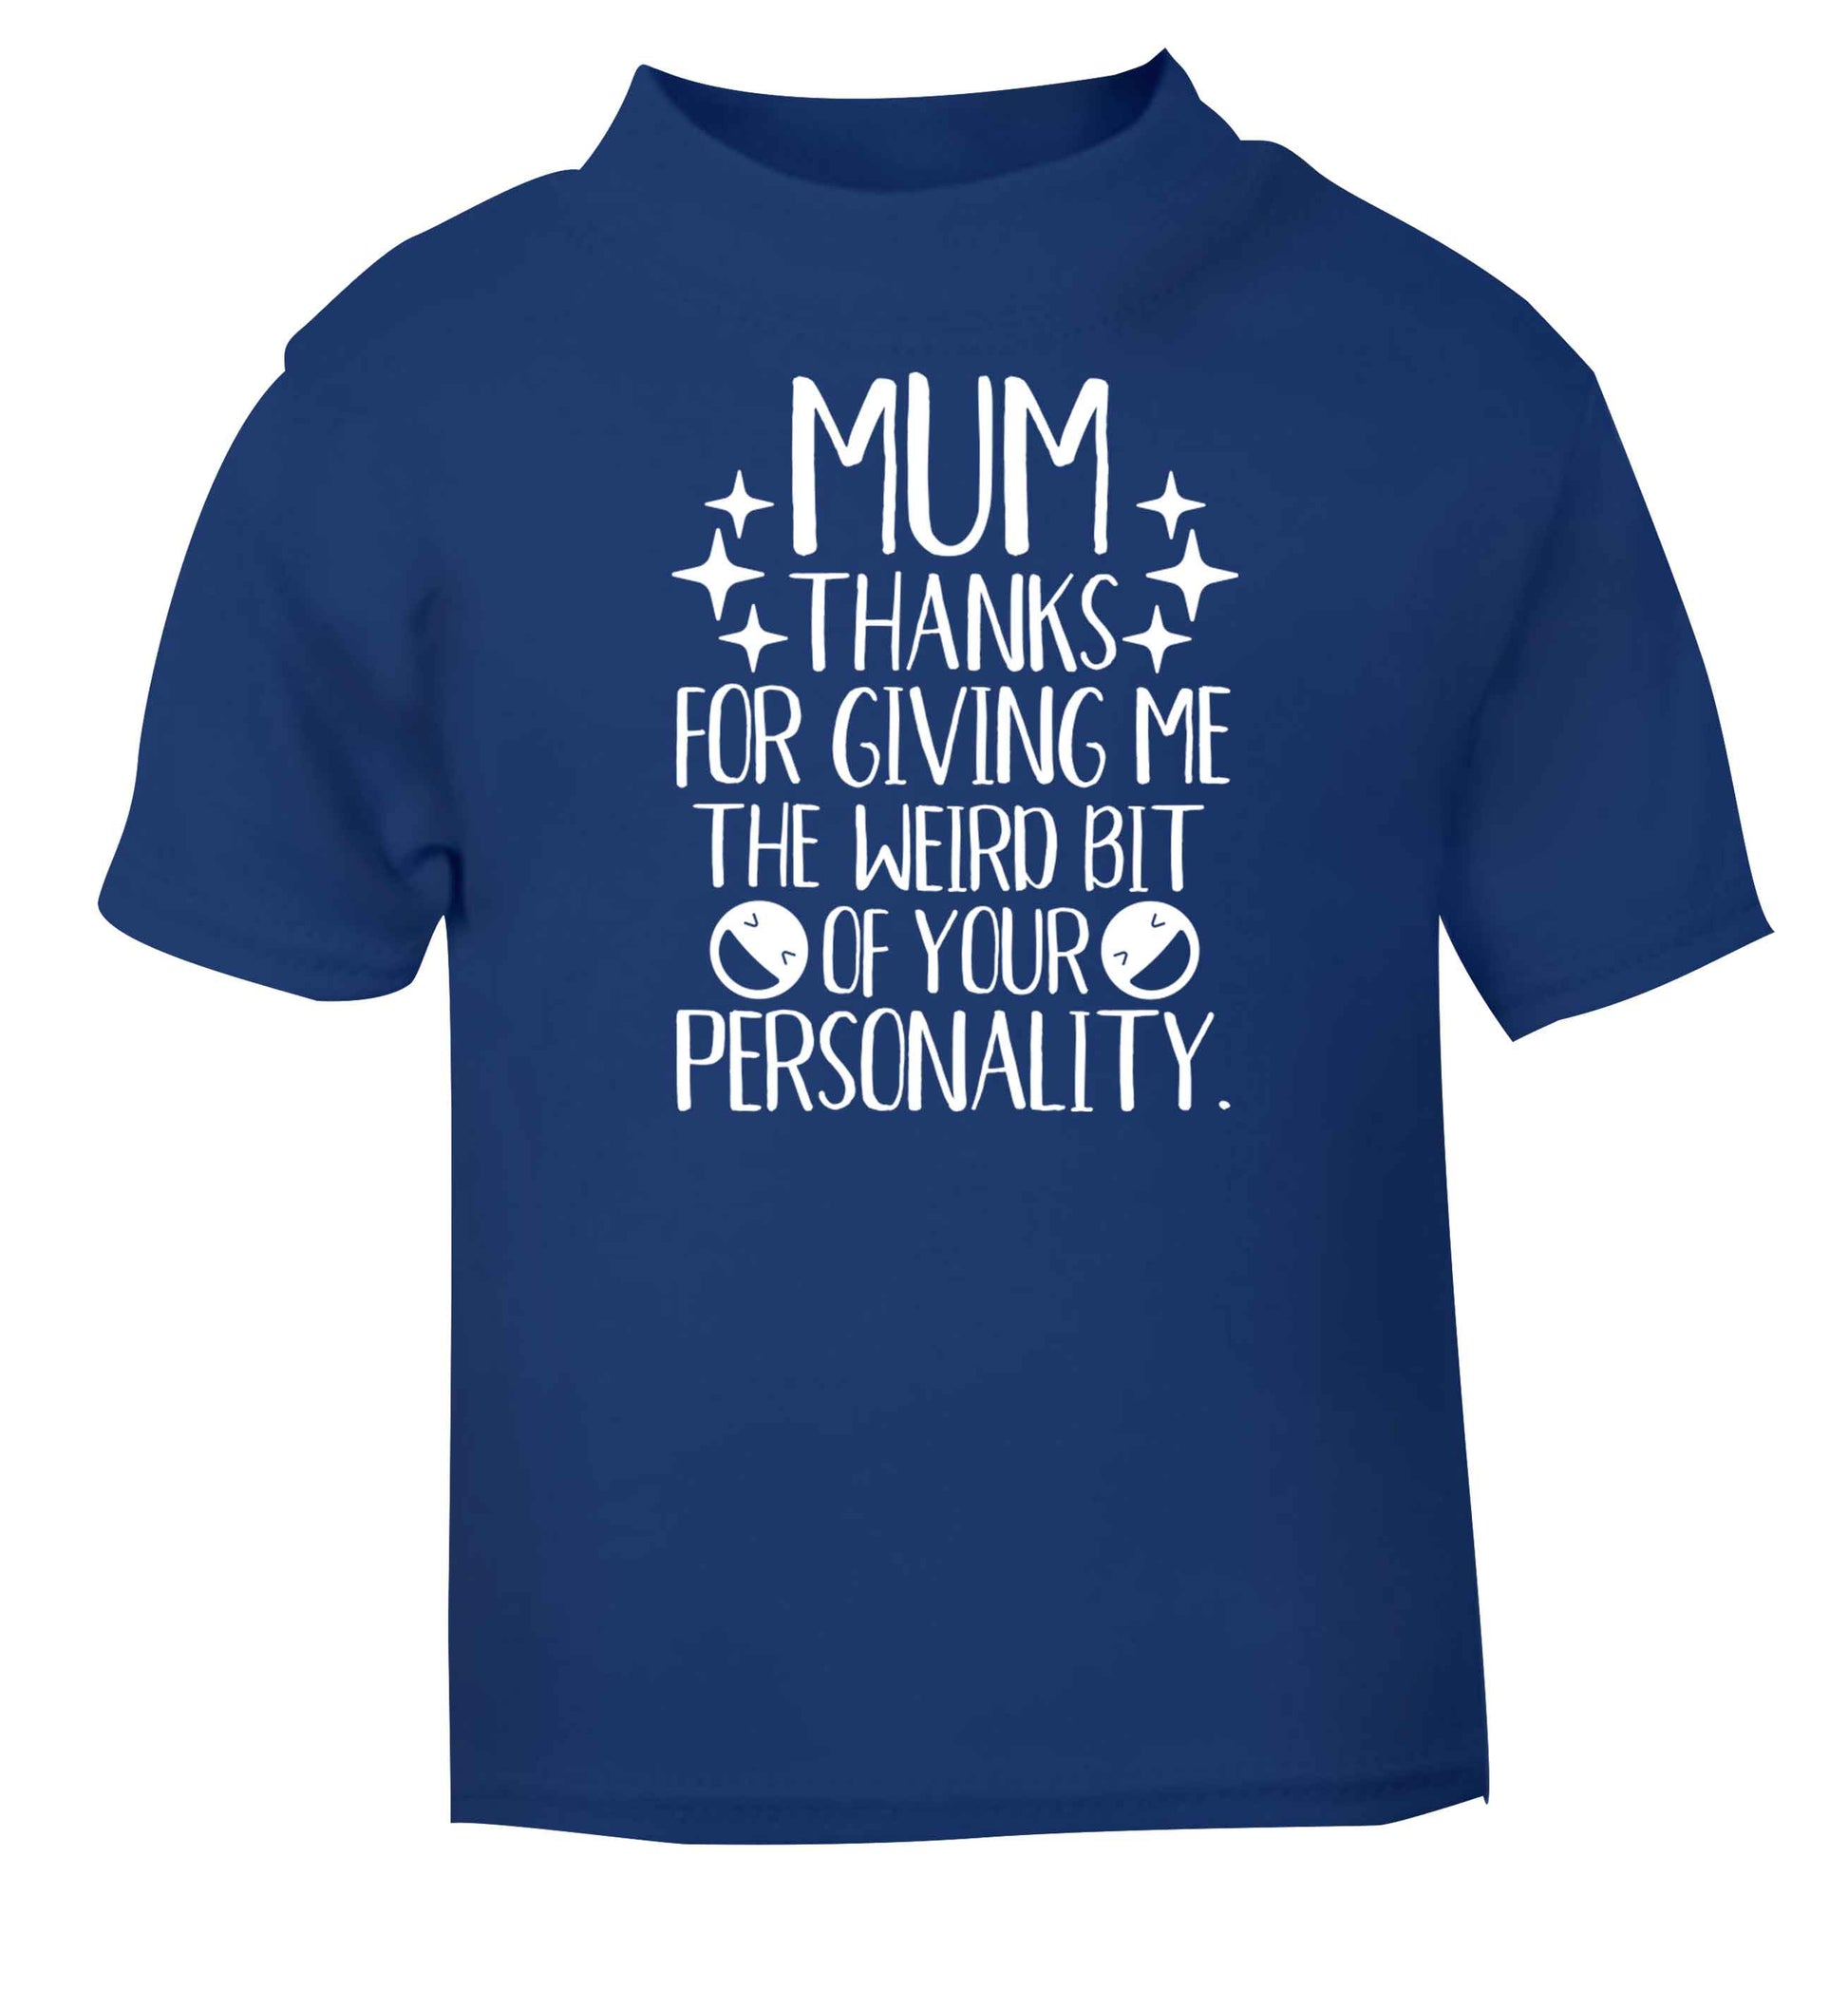 Mum, I love you more than halloumi and if you know me at all you know how deep that is blue baby toddler Tshirt 2 Years